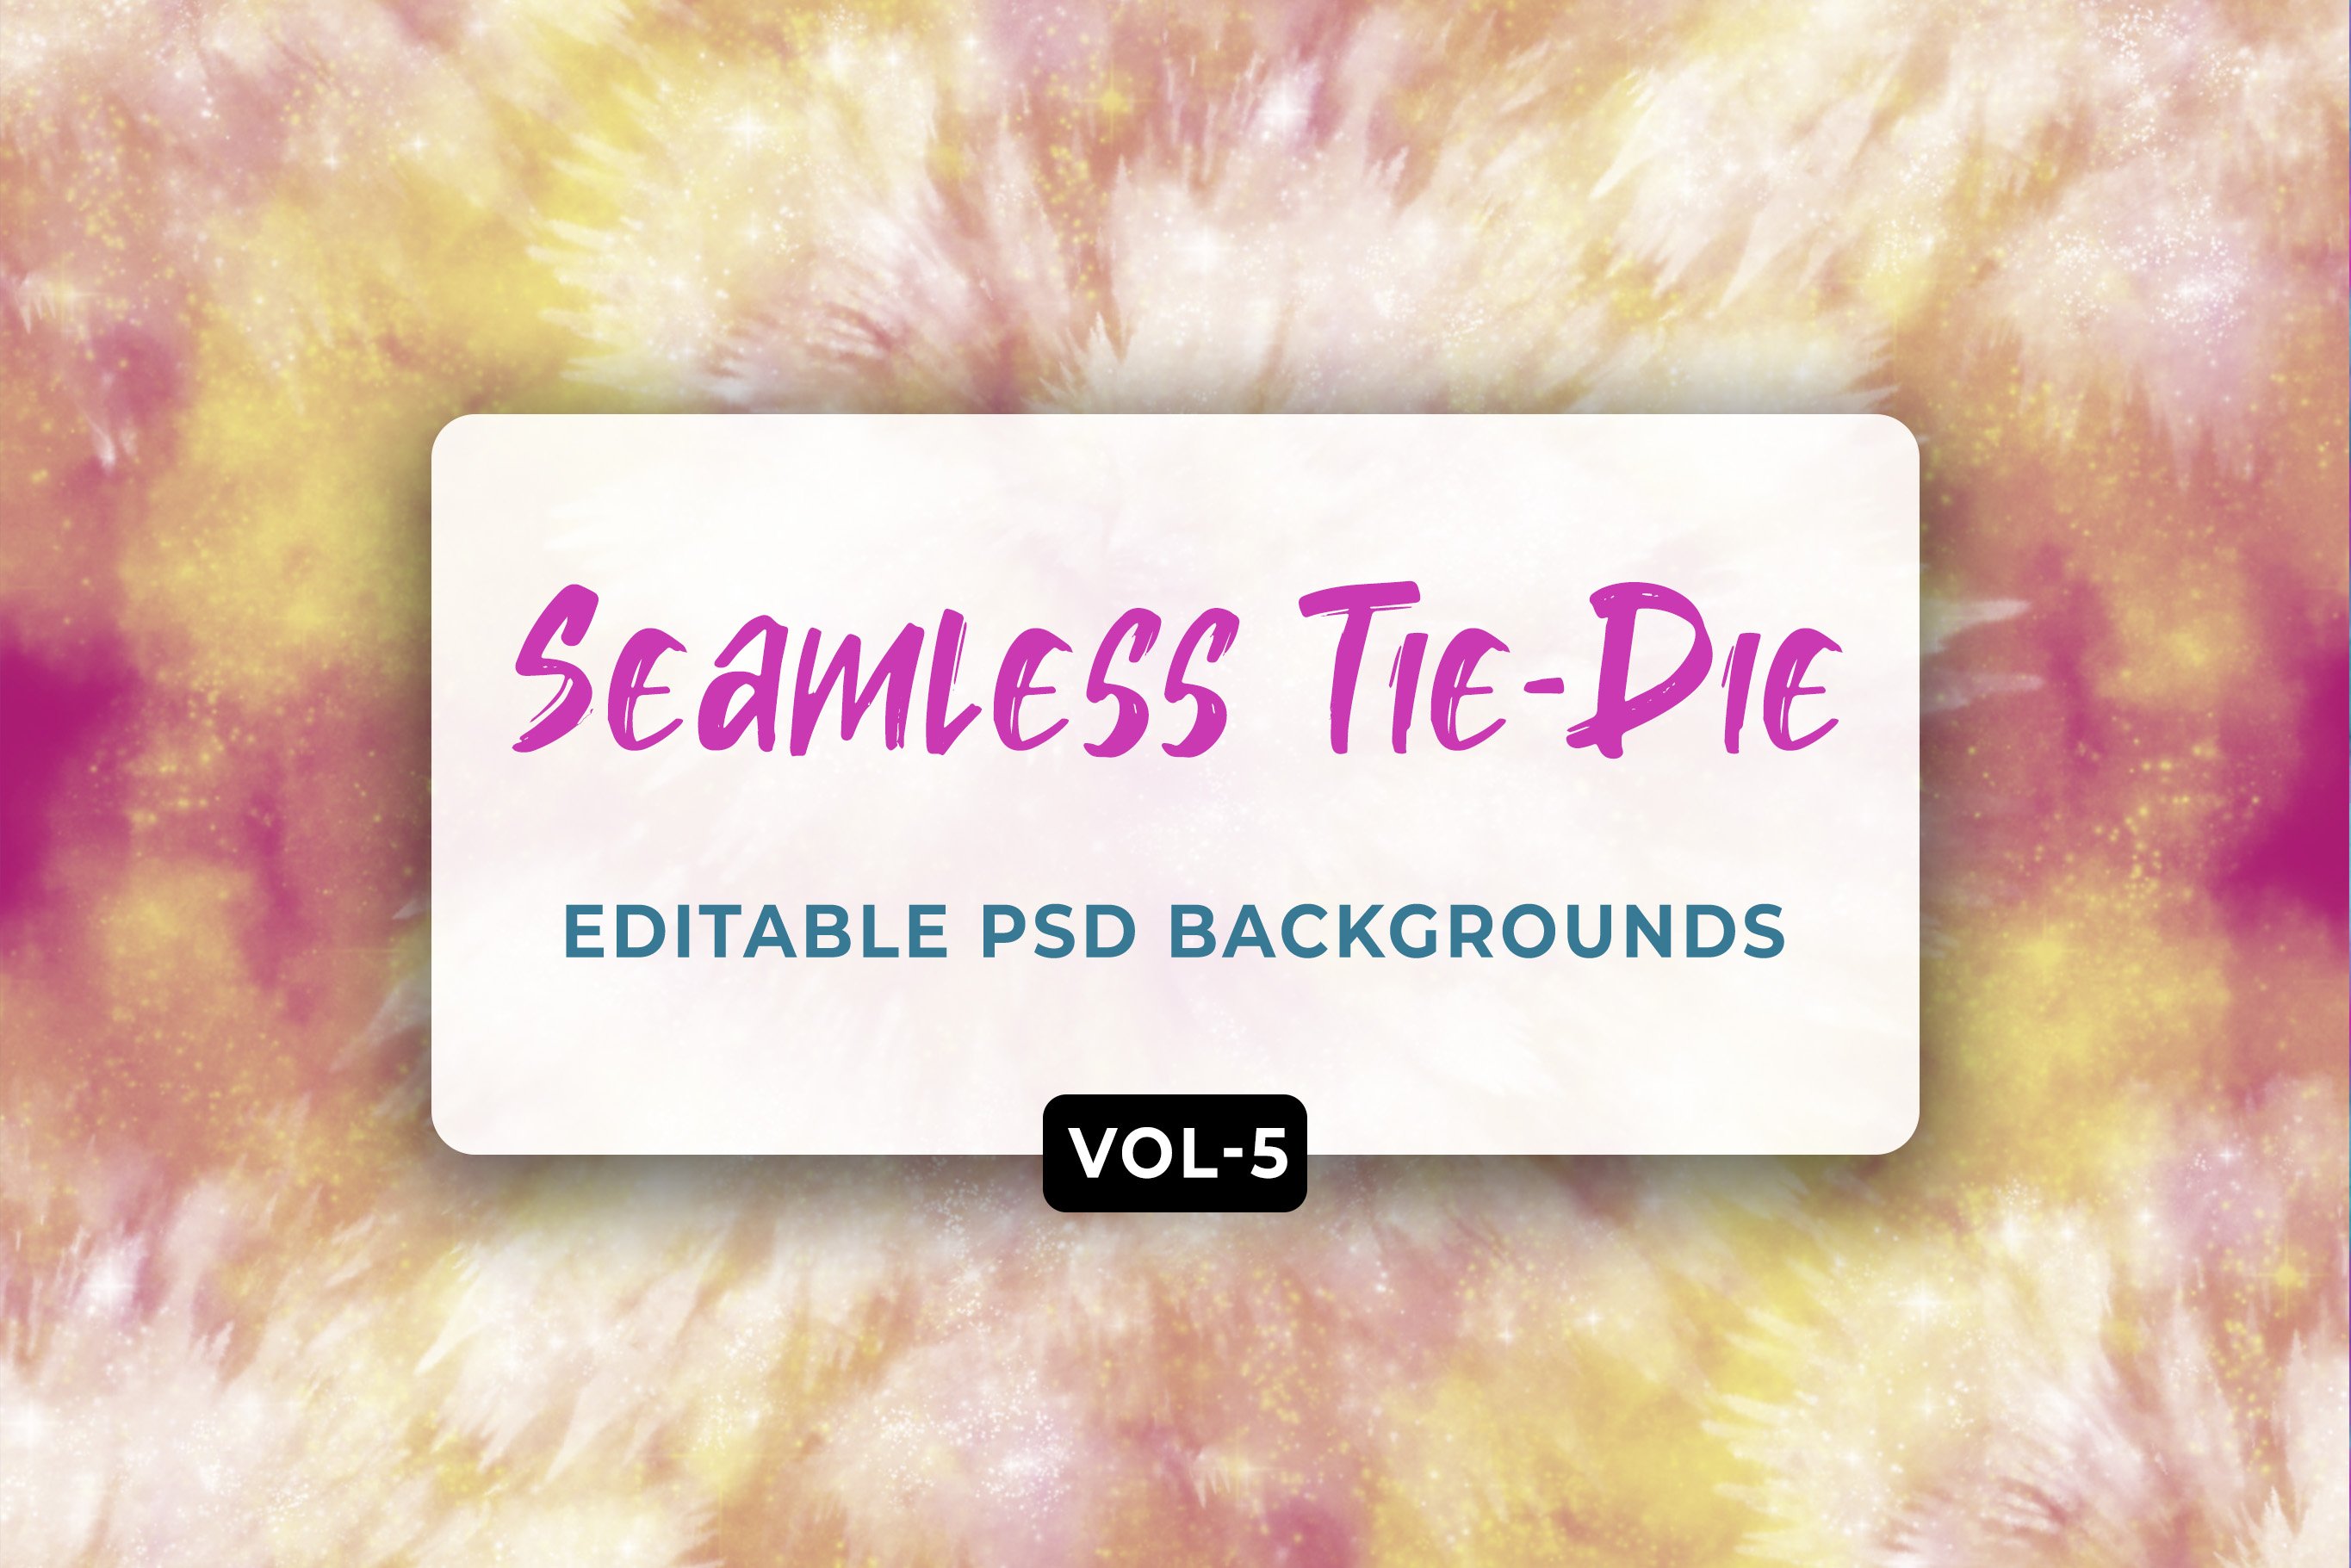 Tie Dye Seamless Patterns Vol- 05 cover image.